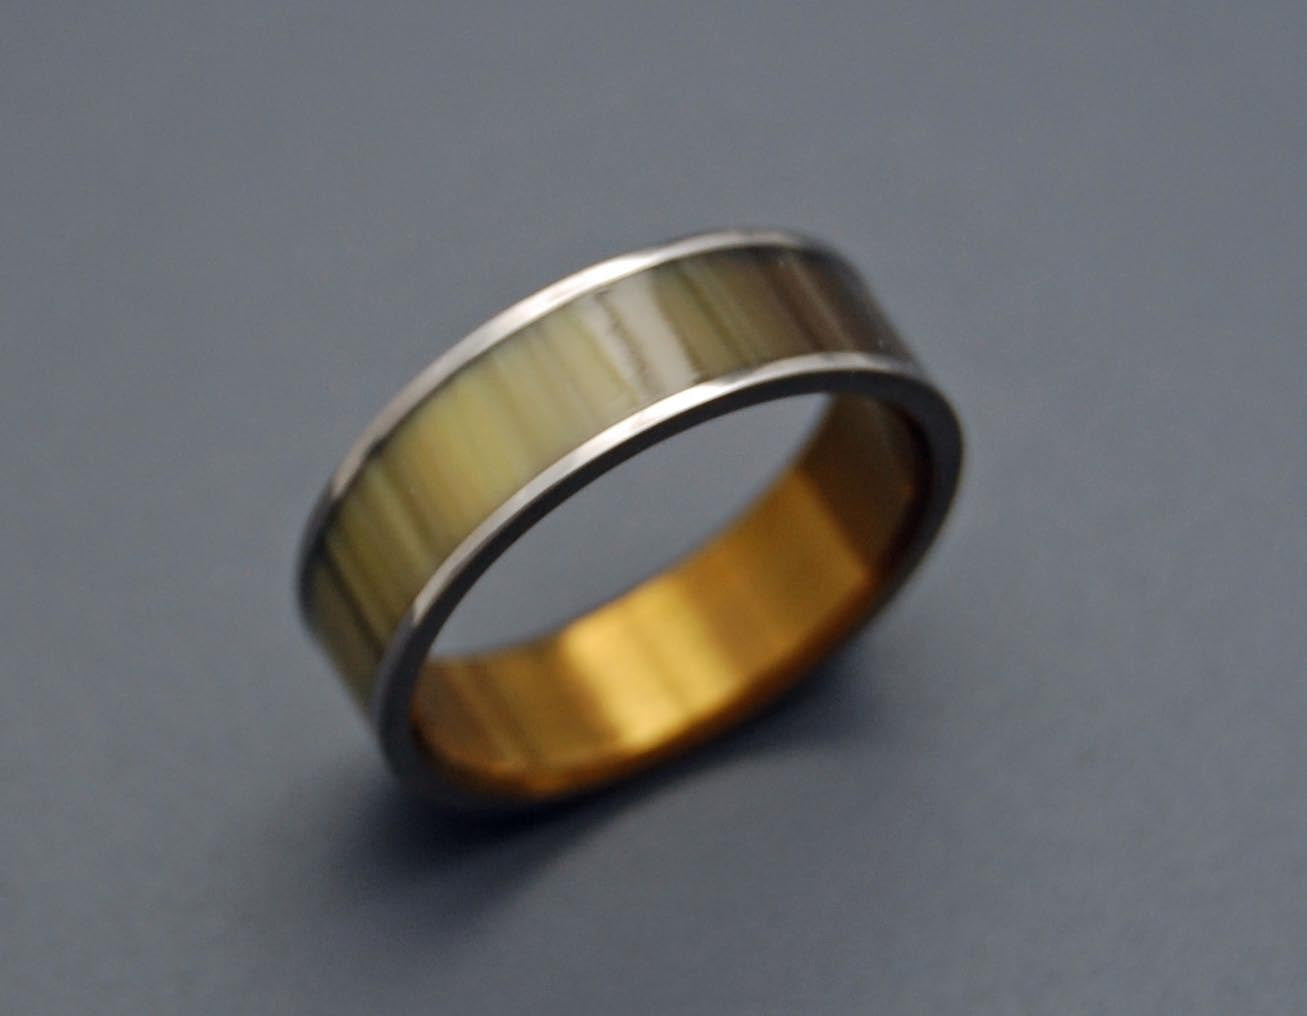 Love Corral | Horn and Hand Anodized Titanium Wedding Ring - Minter and Richter Designs